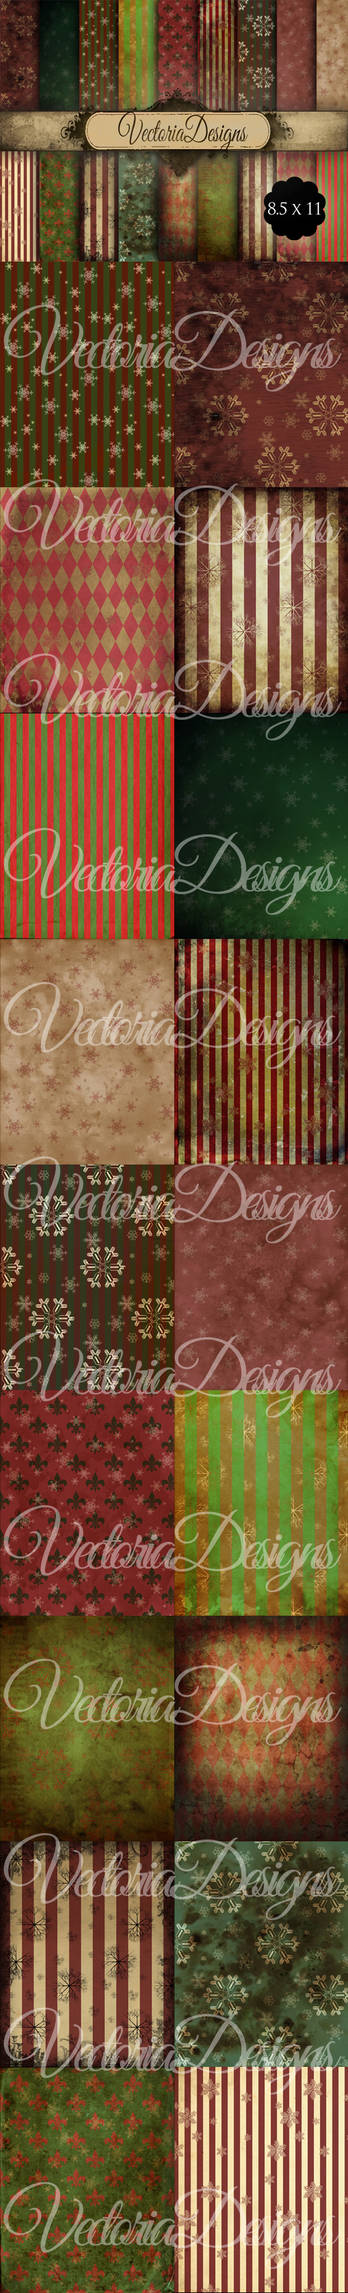 Grunge Christmas Papers